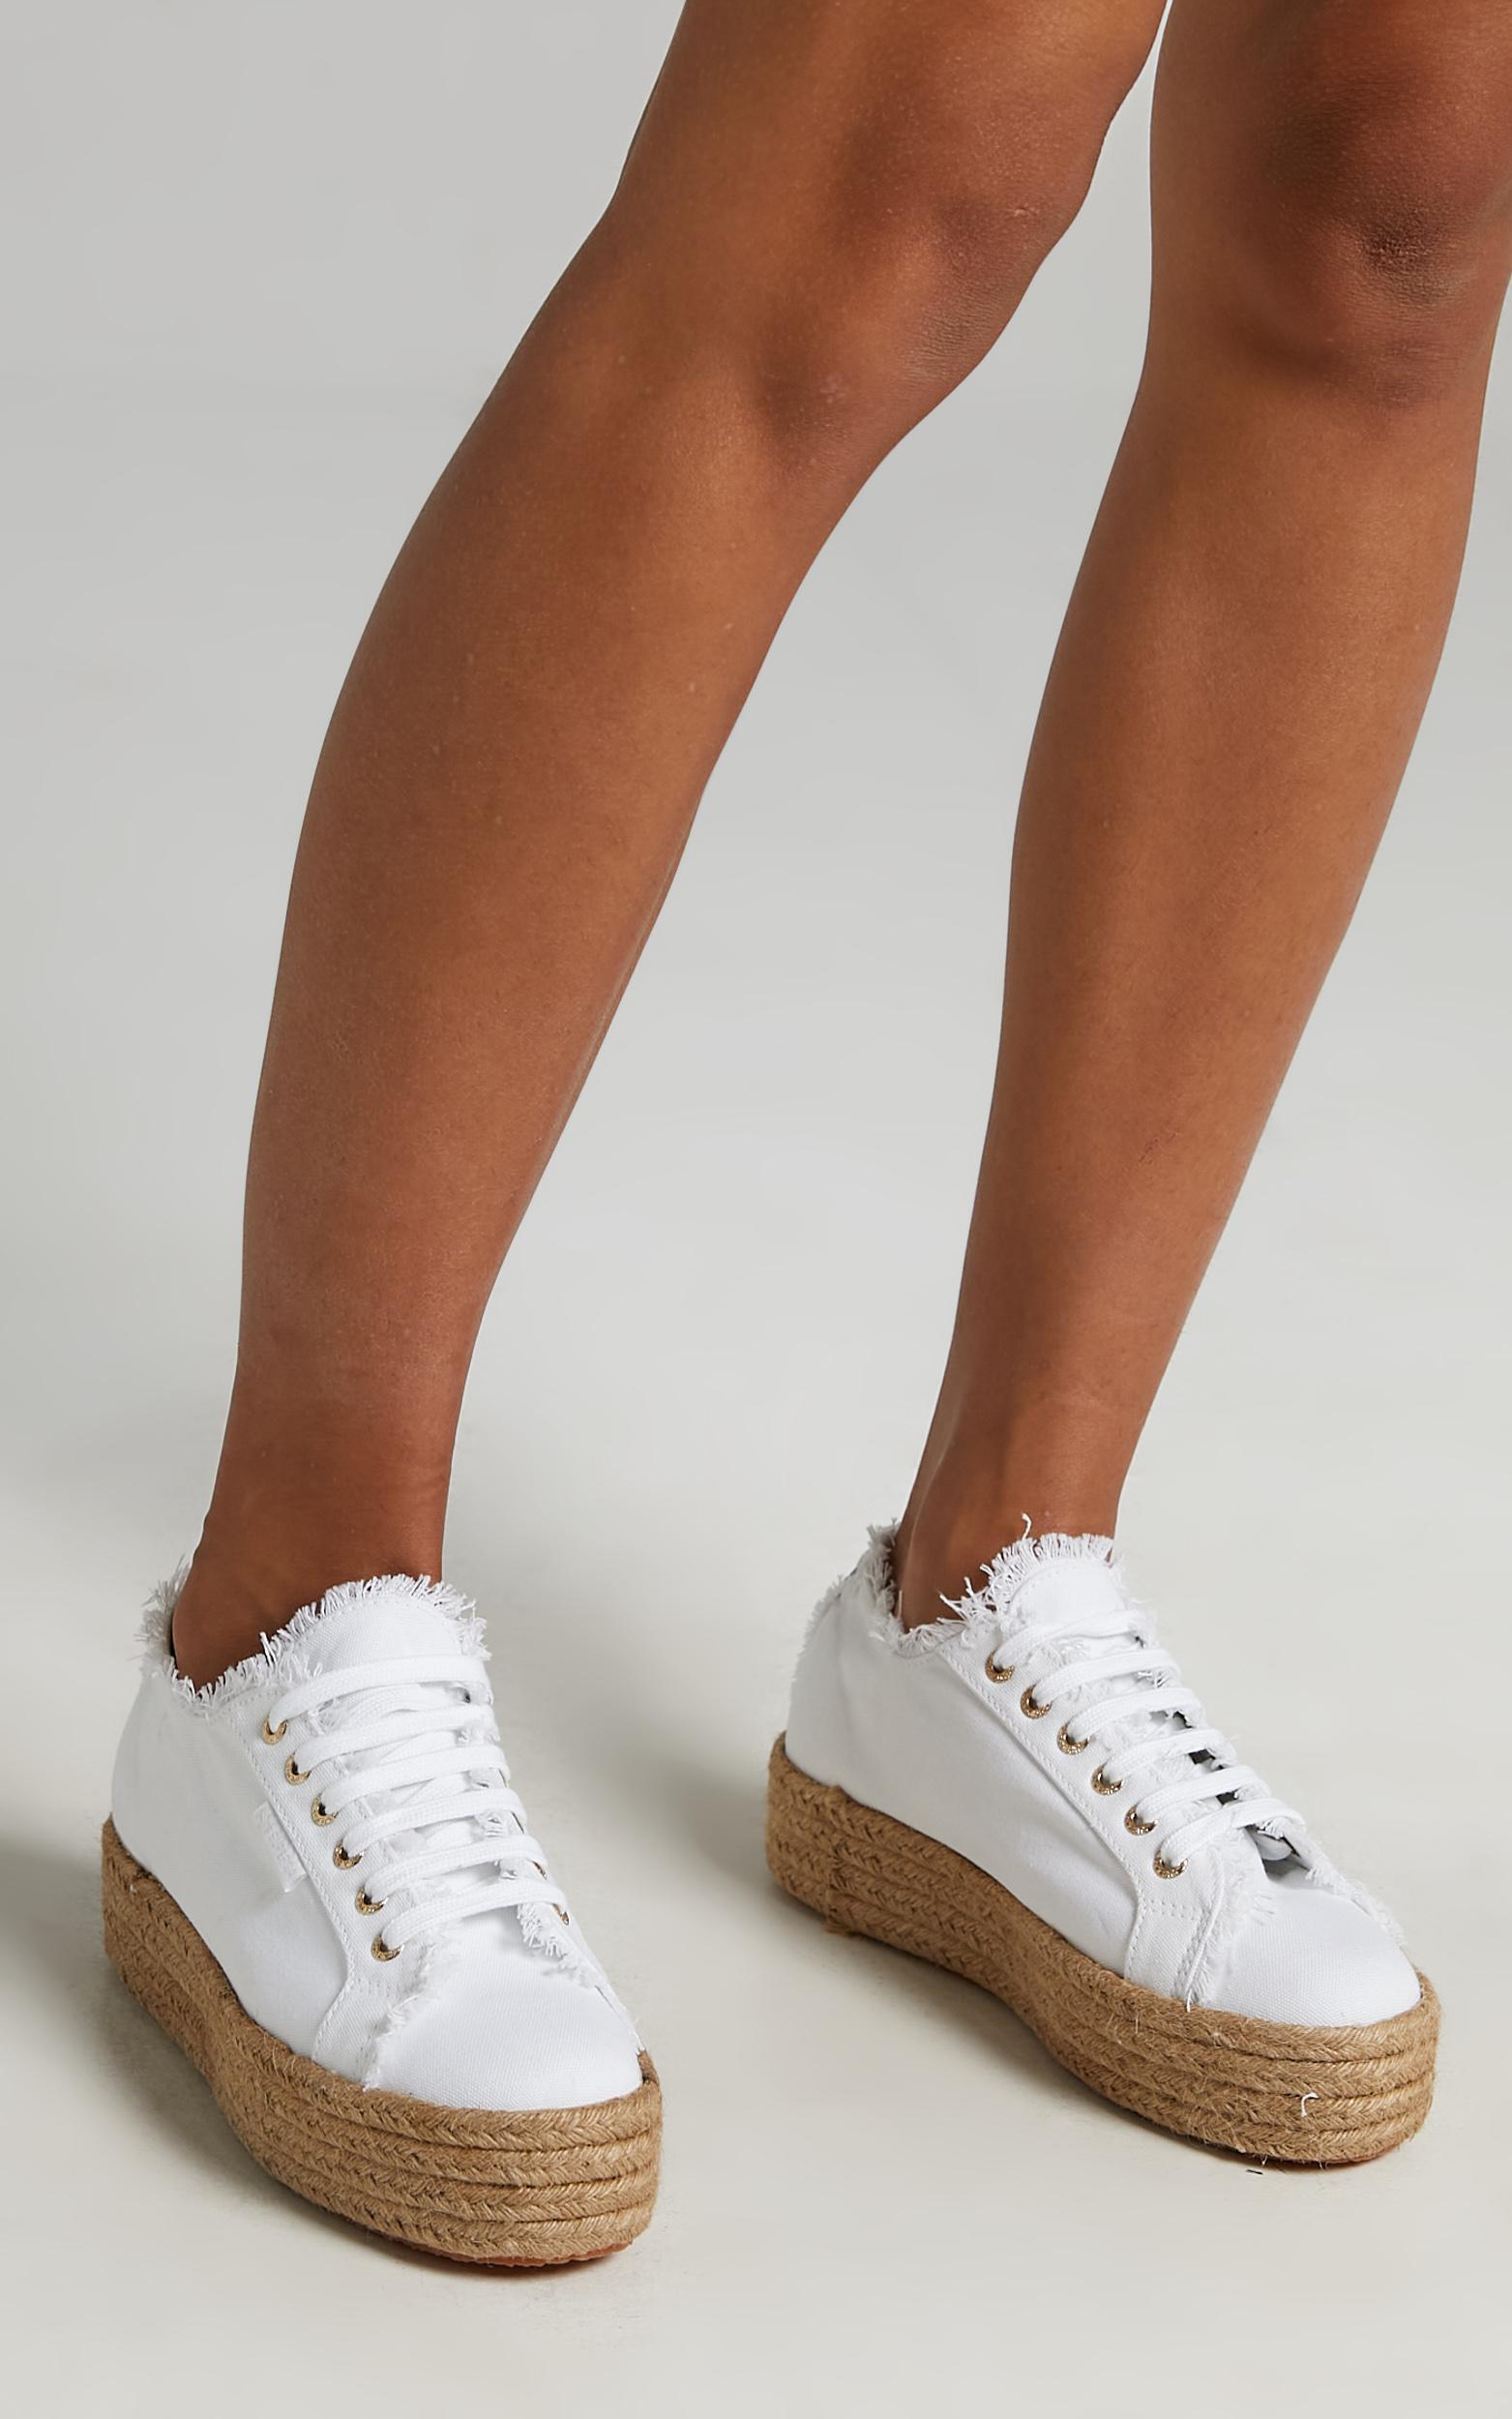 Superga - 2790 Fringed Cotton Rope in 901 White - 05, WHT1, hi-res image number null